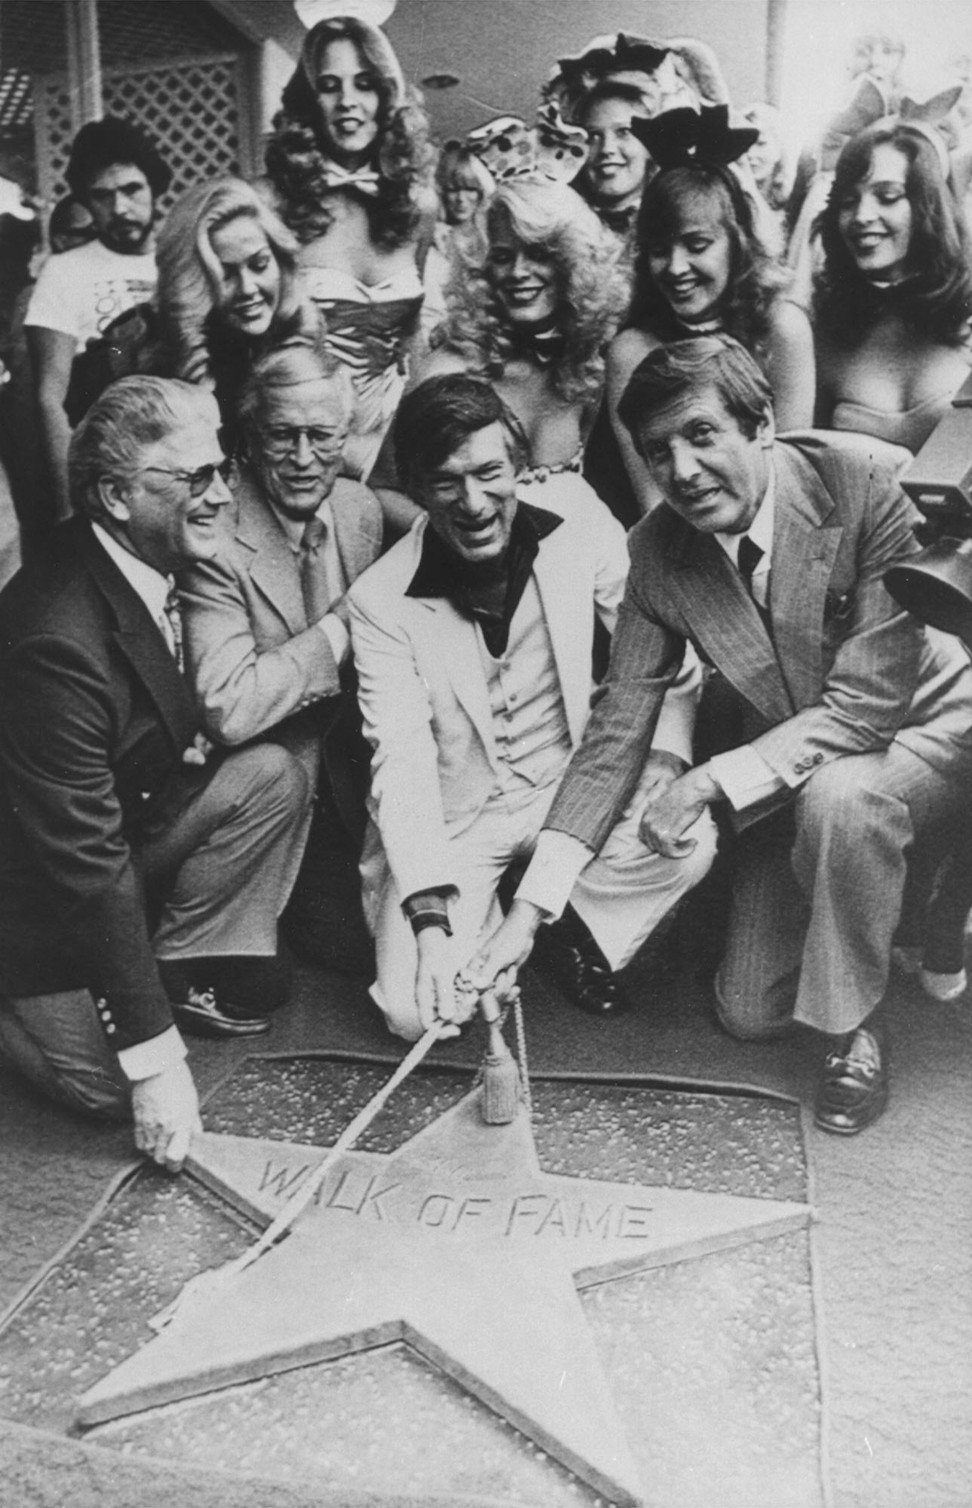 Monty Hall (right) presents a star on the Hollywood Walk of Fame in Los Angeles to Playboy founder Hugh Hefner (centre) in 1980. File photo: AP